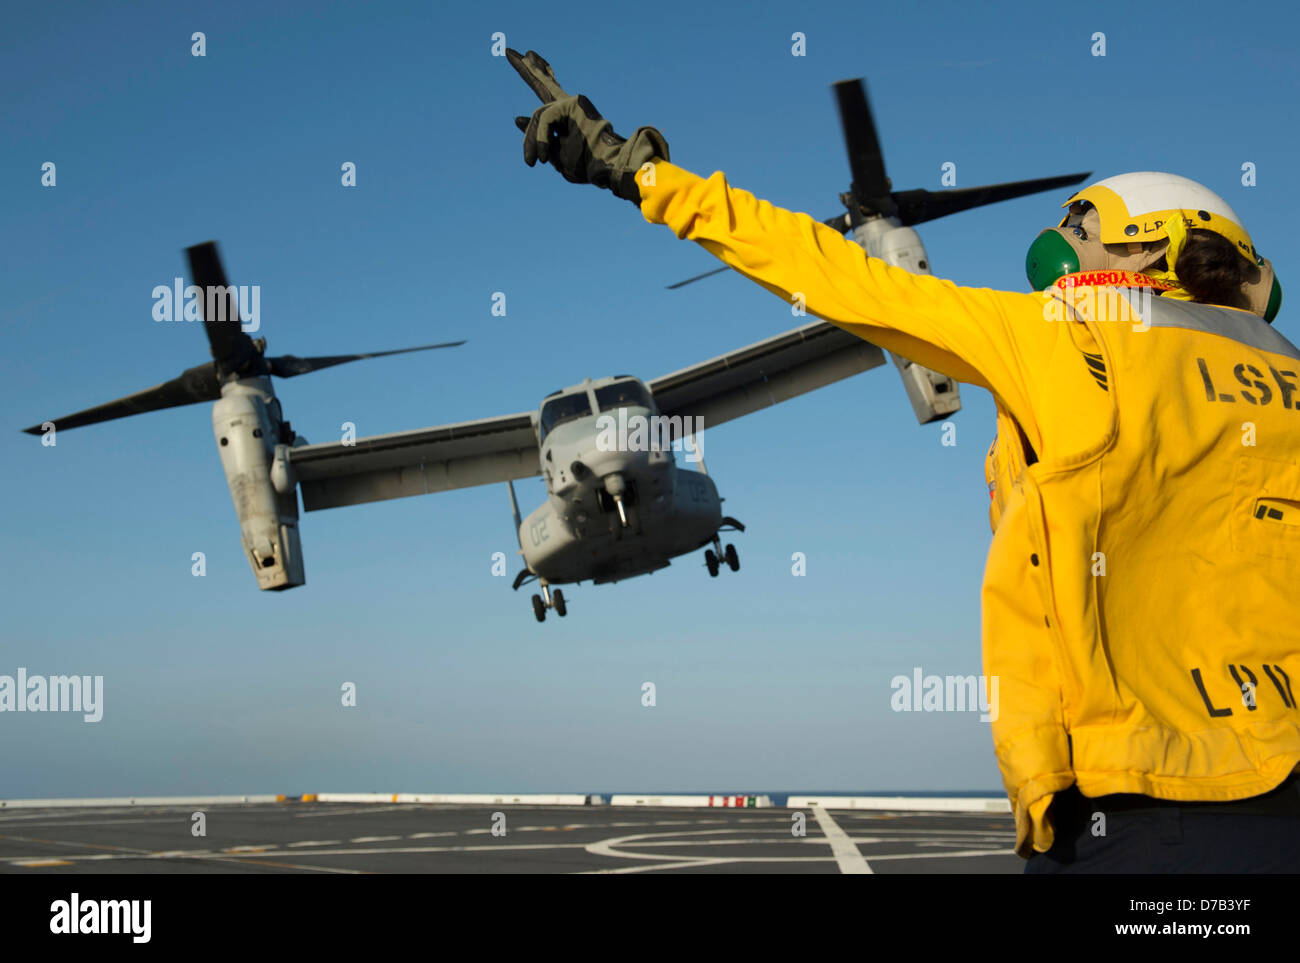 A US Navy Aviation Boatswain's Mate directs the launch of an MV-22 Osprey tilt rotor aircraft on the flight deck of the Amphibious Transport Dock Ship USS Anchorage April 24, 2013 in the Pacific Ocean. Stock Photo